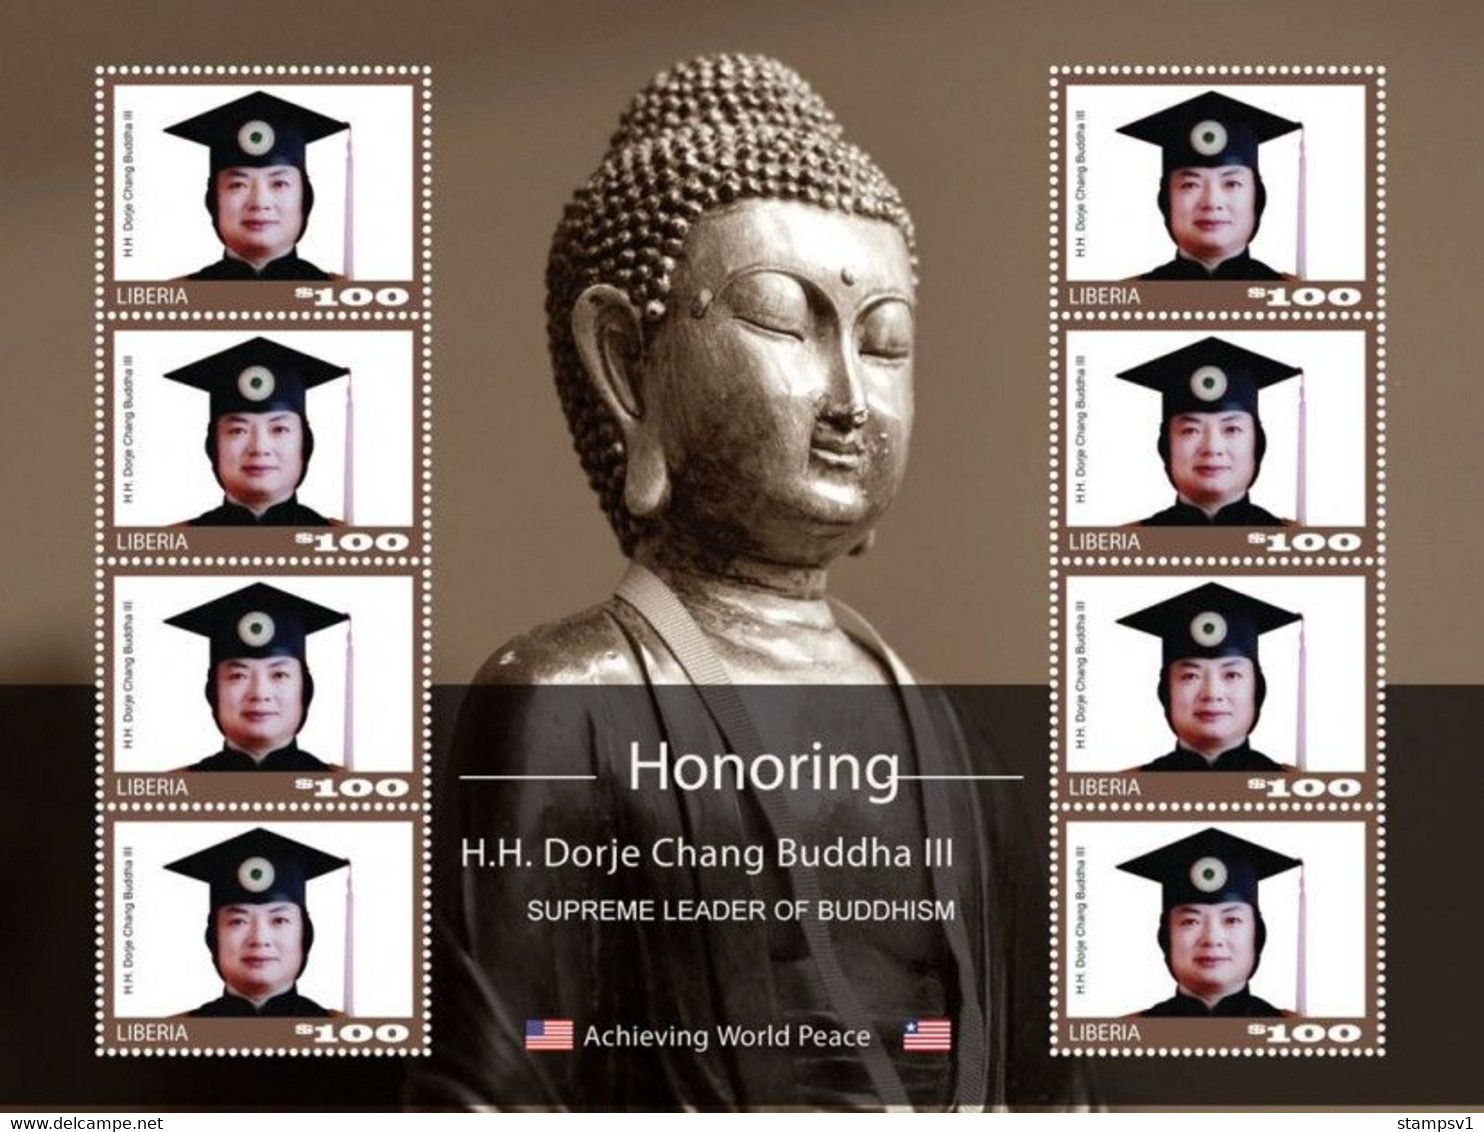 Liberia. 2020 Honoring H.H. Dorje Chang Buddha III, Supreme Leader Of Buddhism. (0305c) OFFICIAL ISSUE - Buddhism